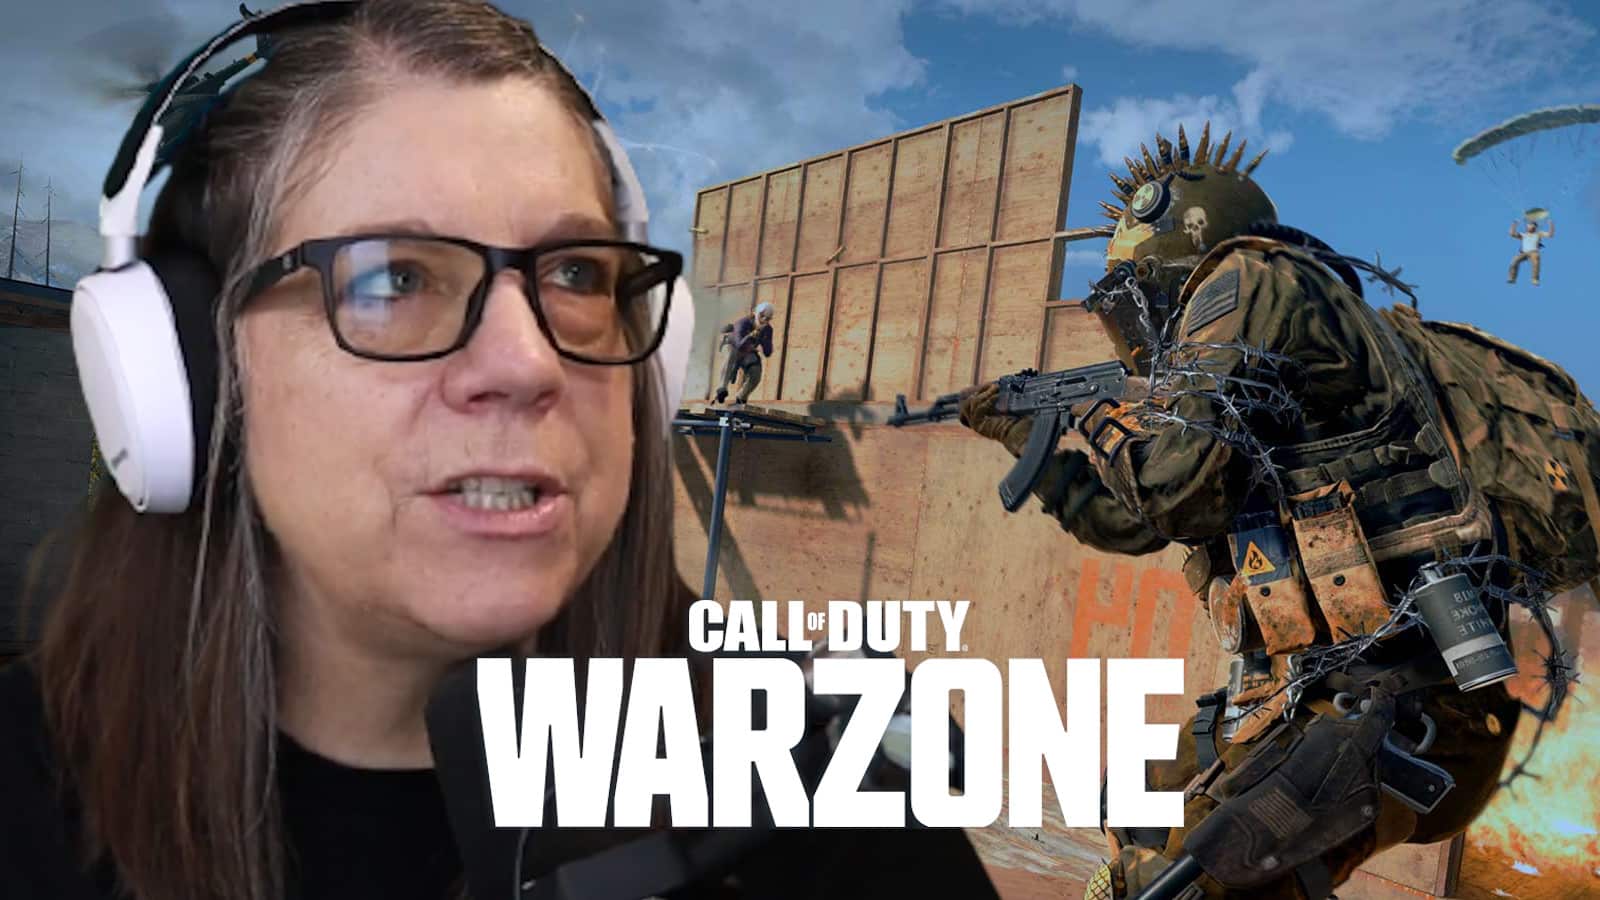 Warzone grandma accused of cheating after insane mid-air snipe